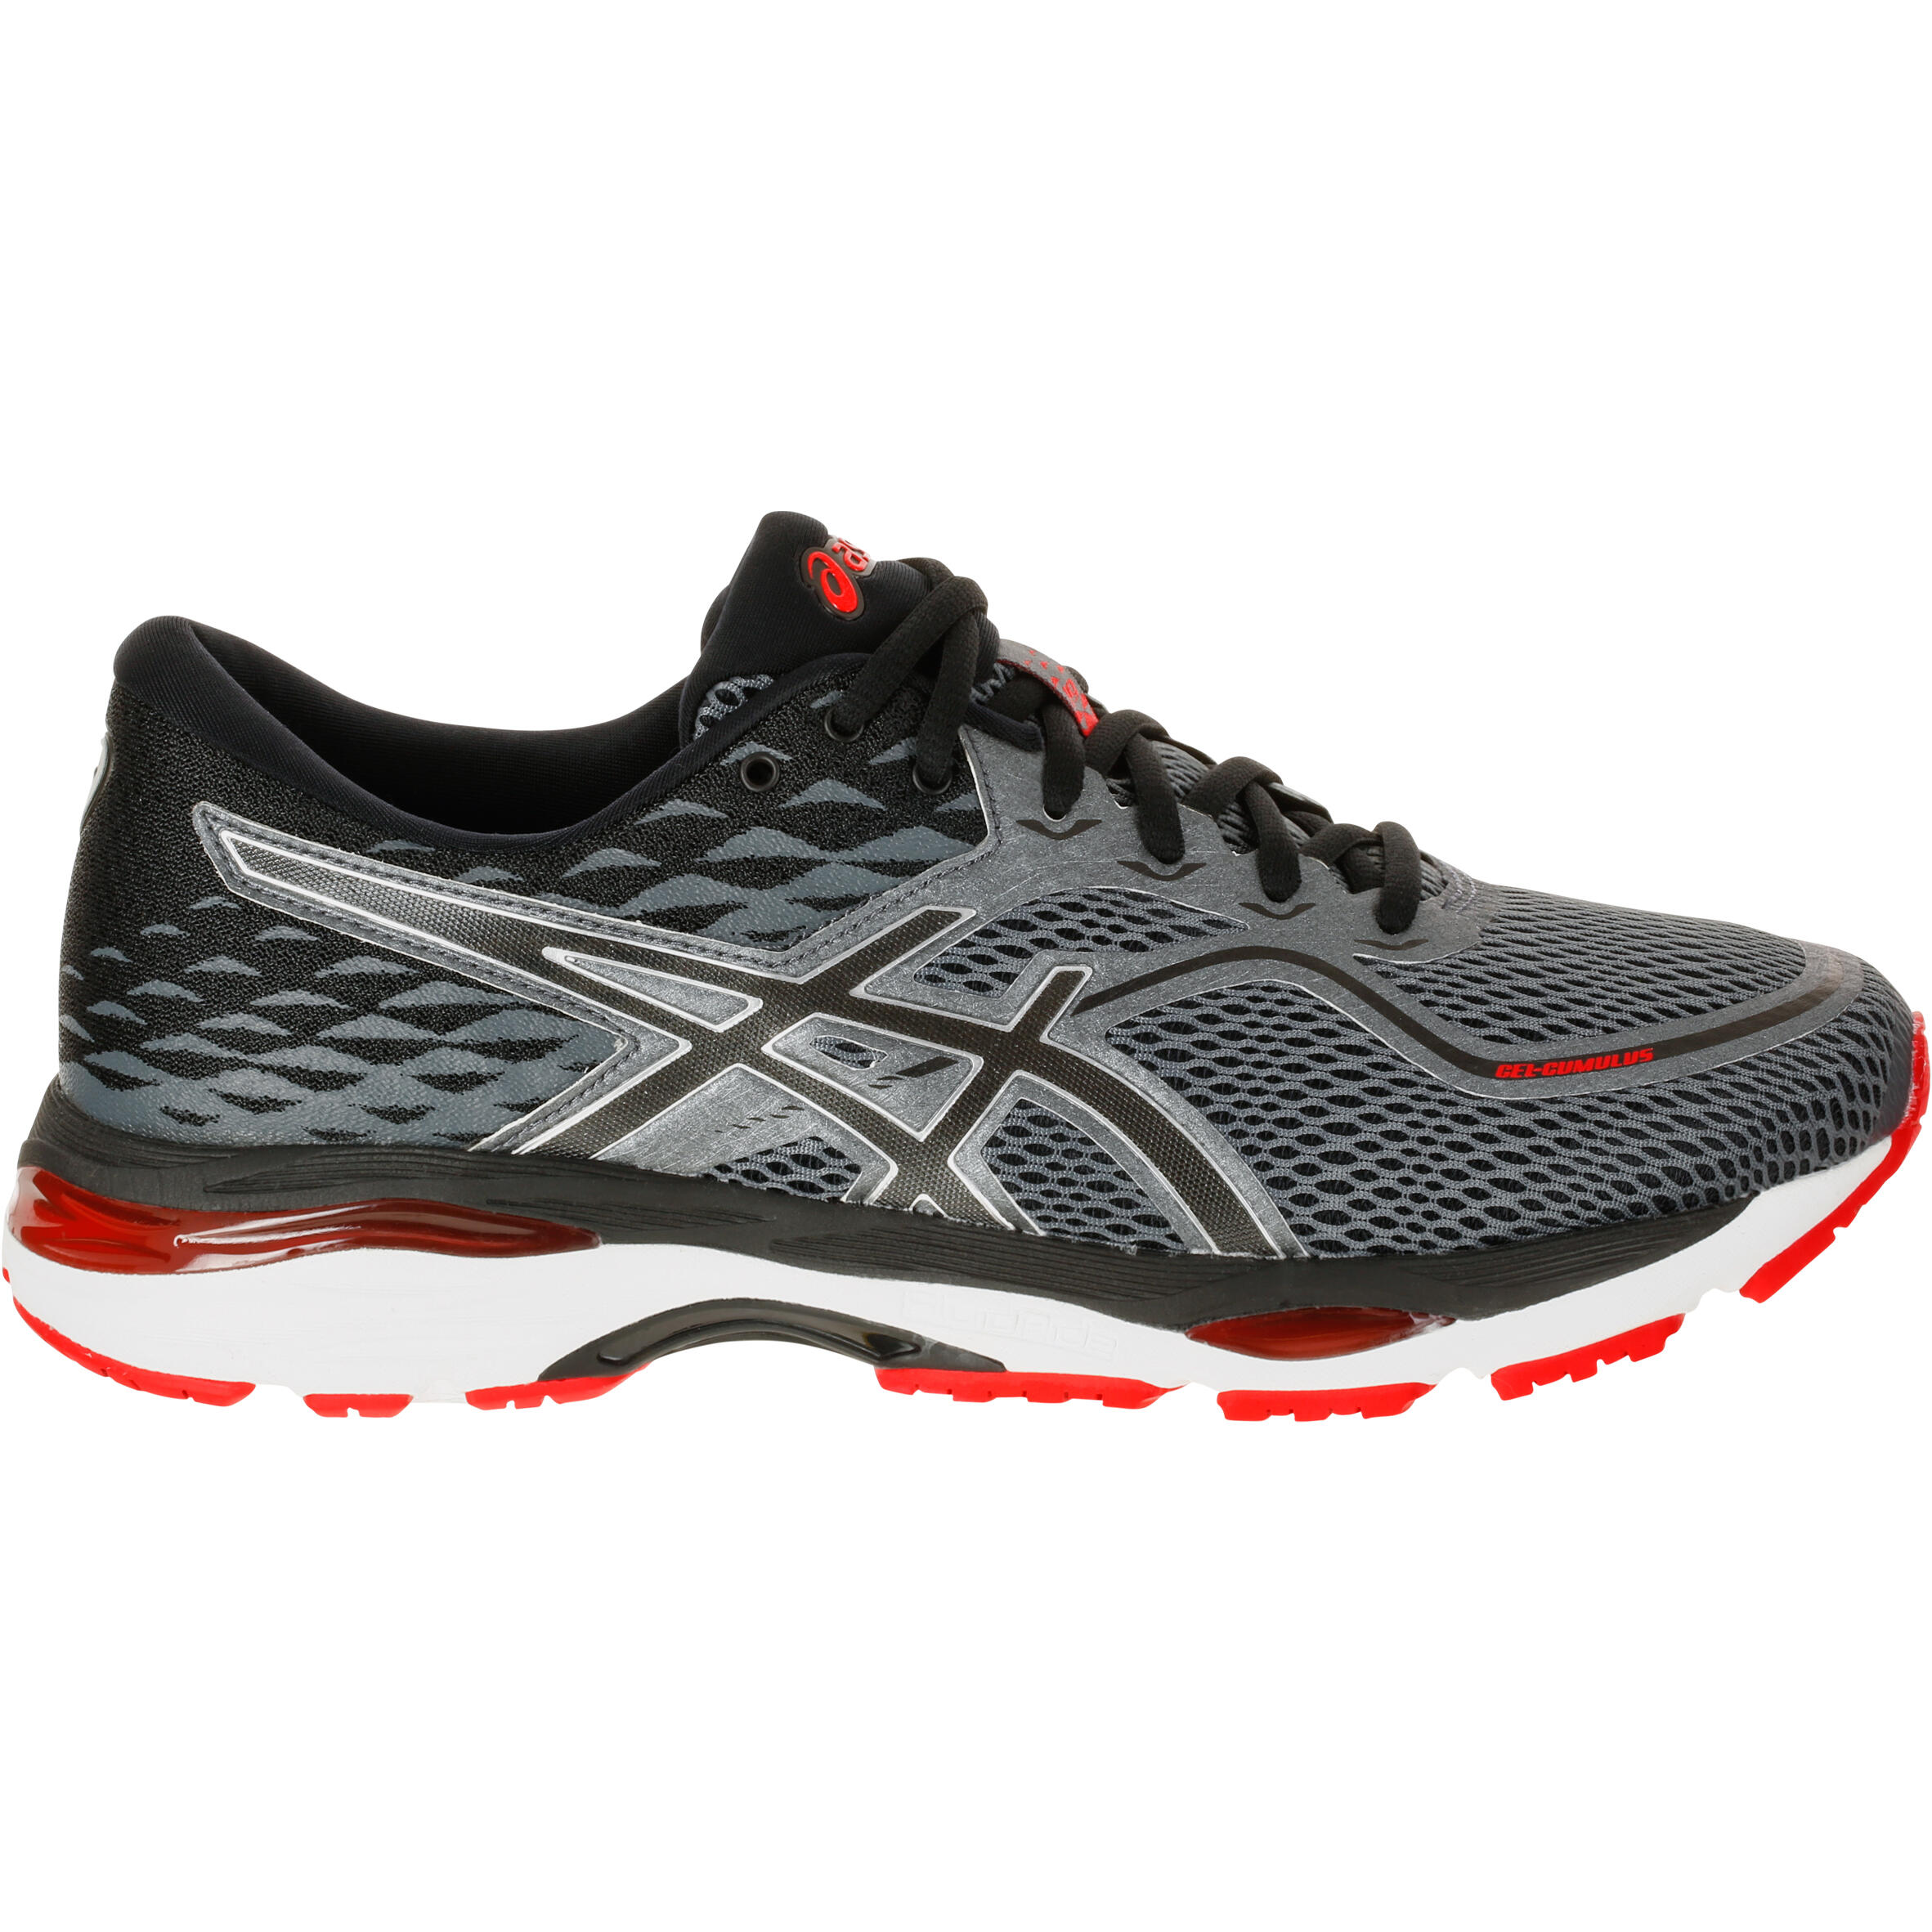 CHAUSSURES RUNNING COURSE A PIED ASICS GEL CUMULUS 19 HOMME ROUGE